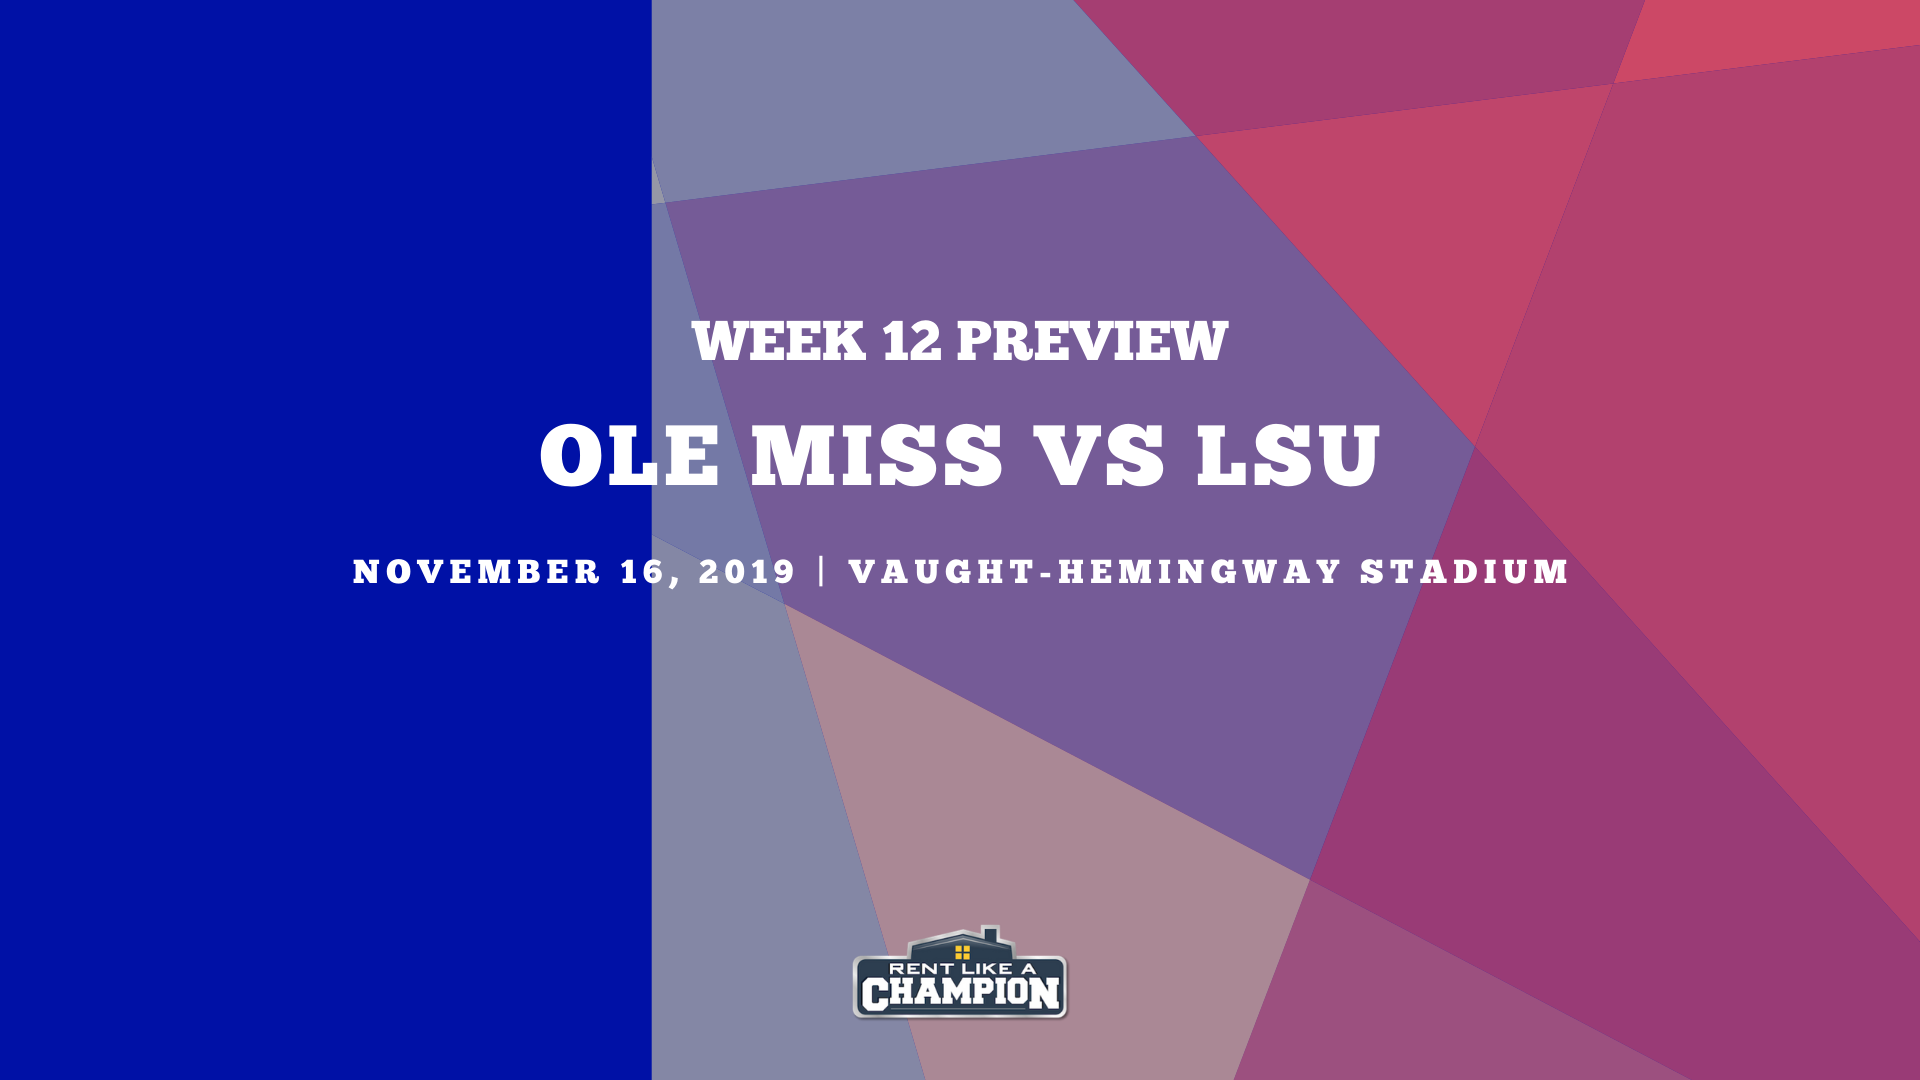 Ole Miss Game Preview Template (11)